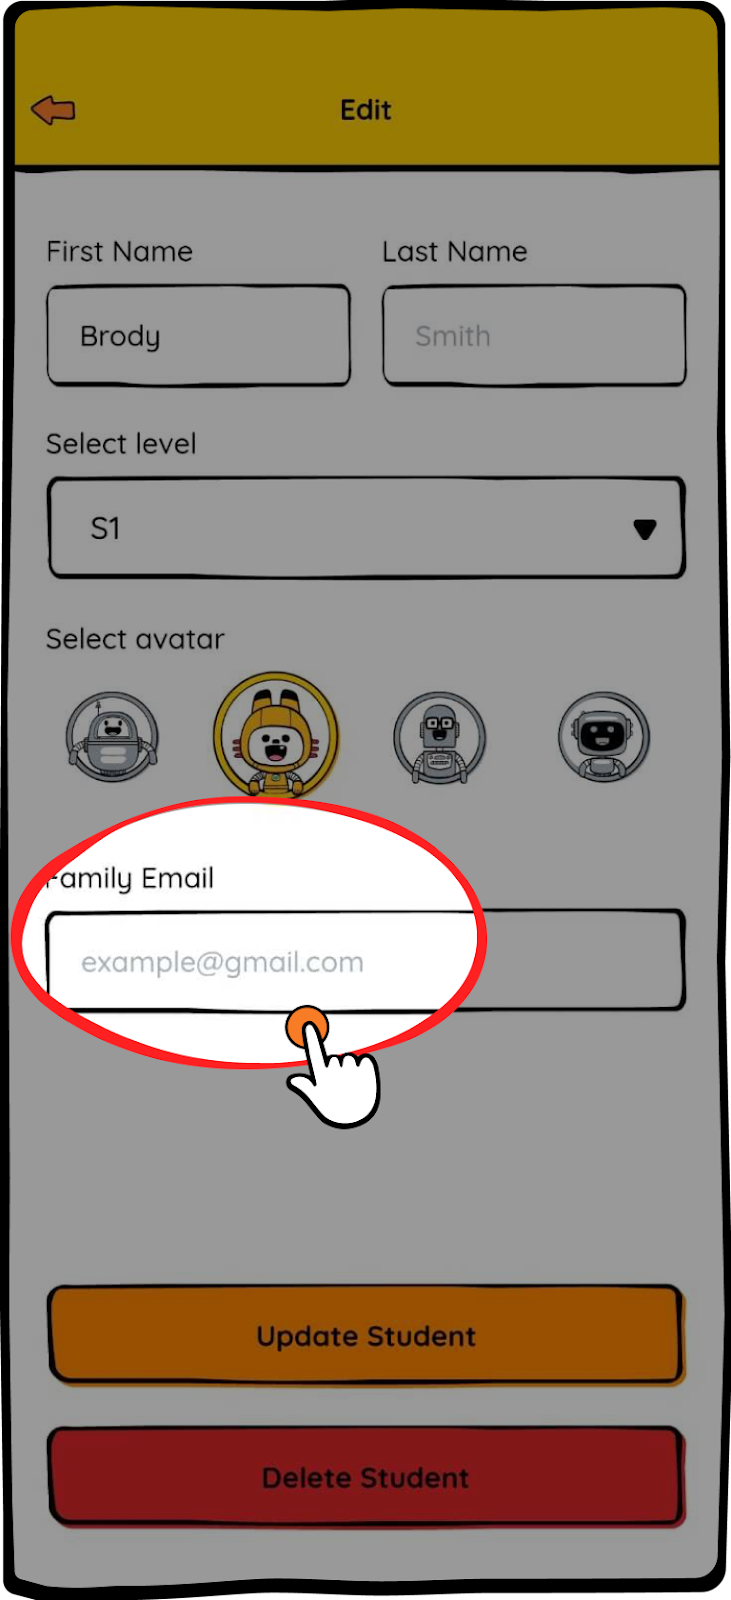 Input the student's or parent's email